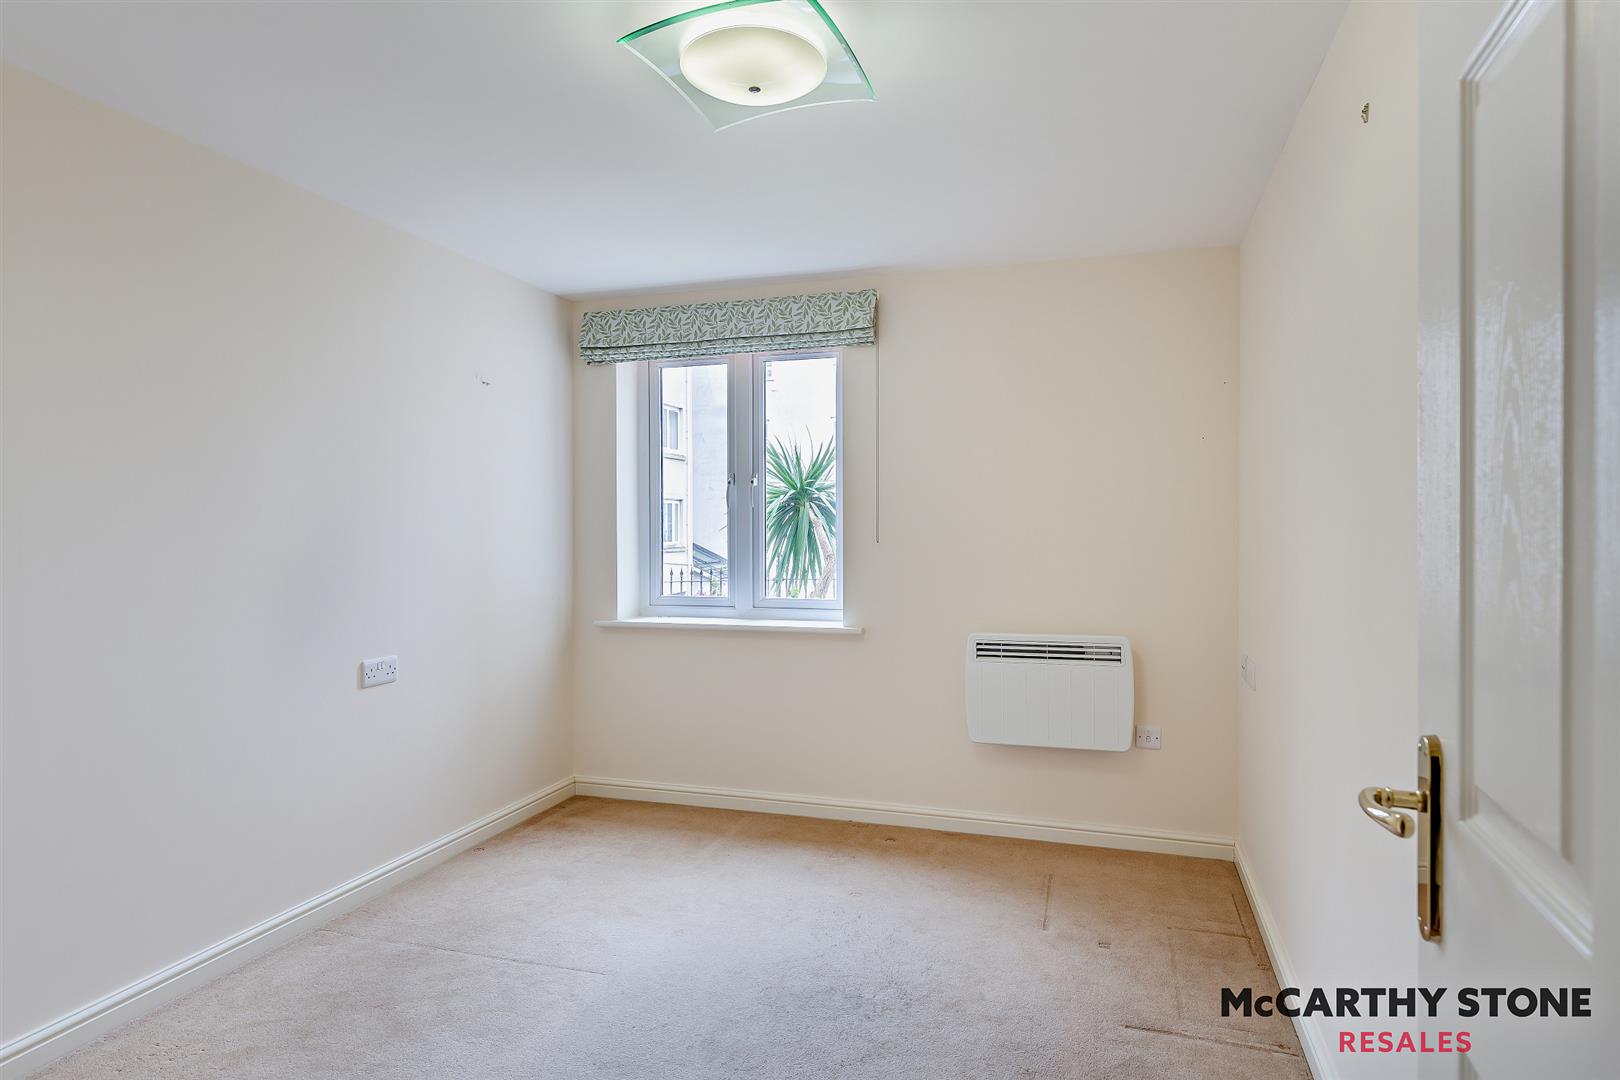 Marina Court, Mount Wise, Newquay, TR7 2EJ